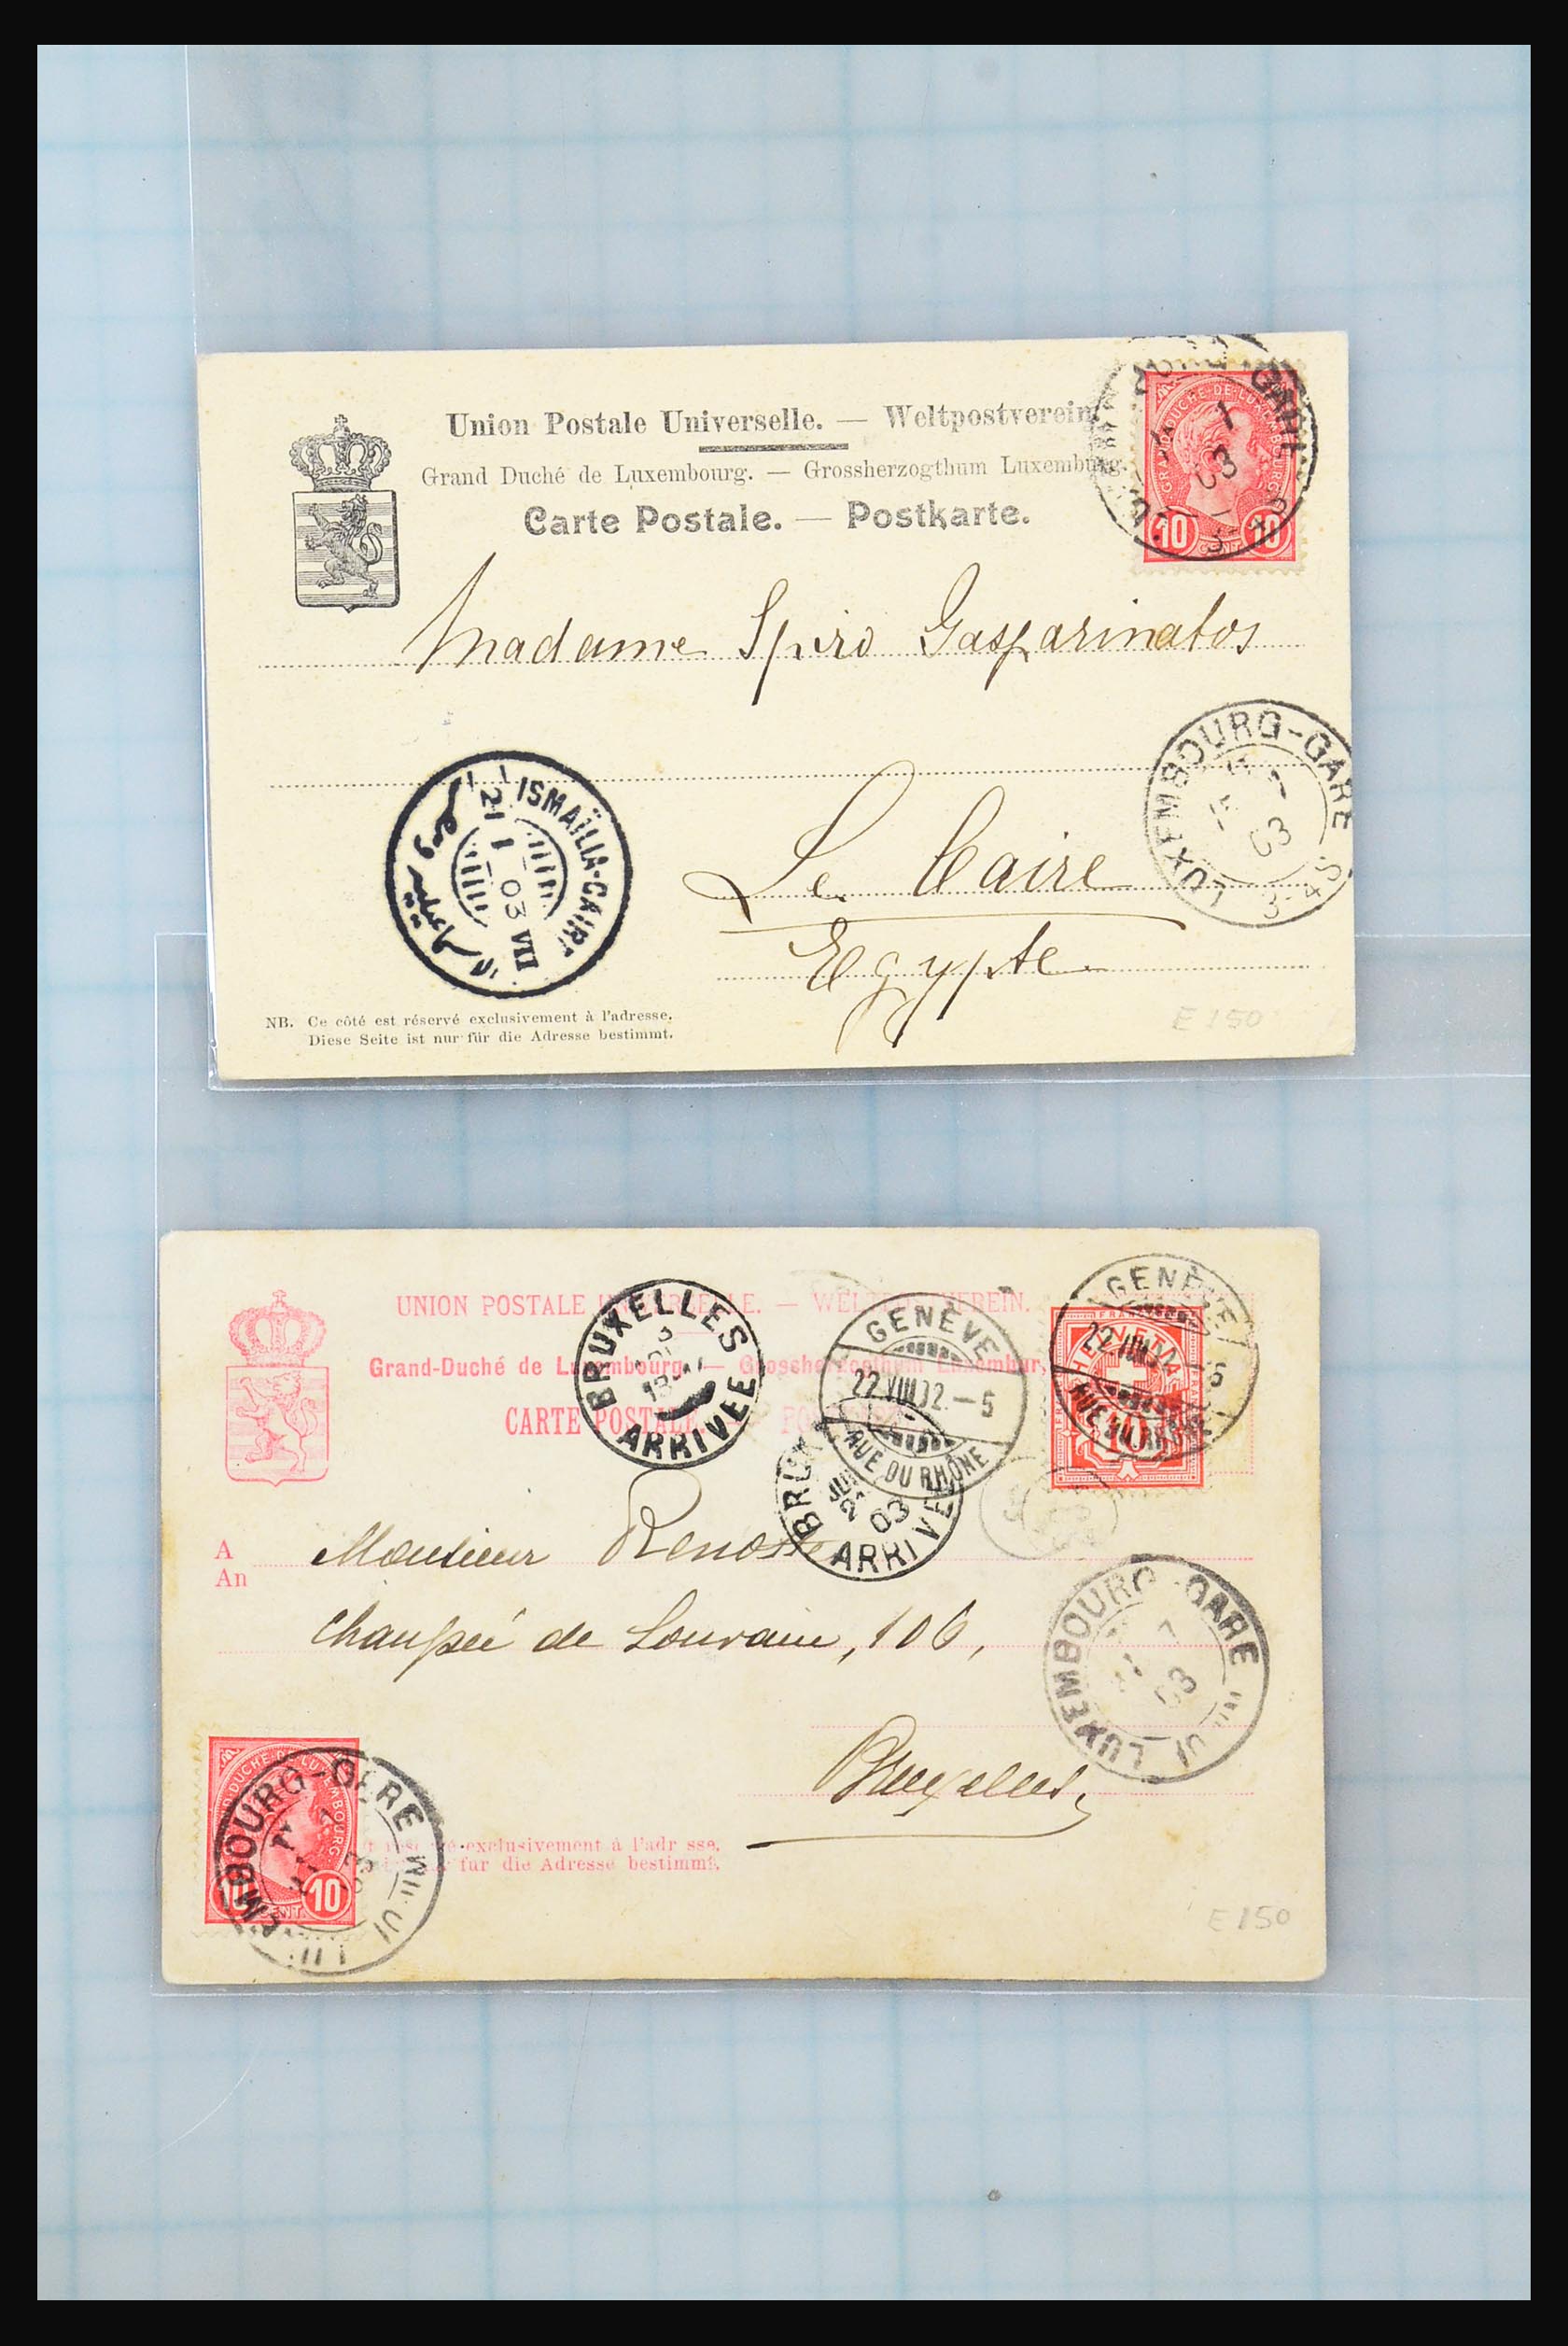 31358 066 - 31358 Portugal/Luxemburg/Greece covers 1880-1960.